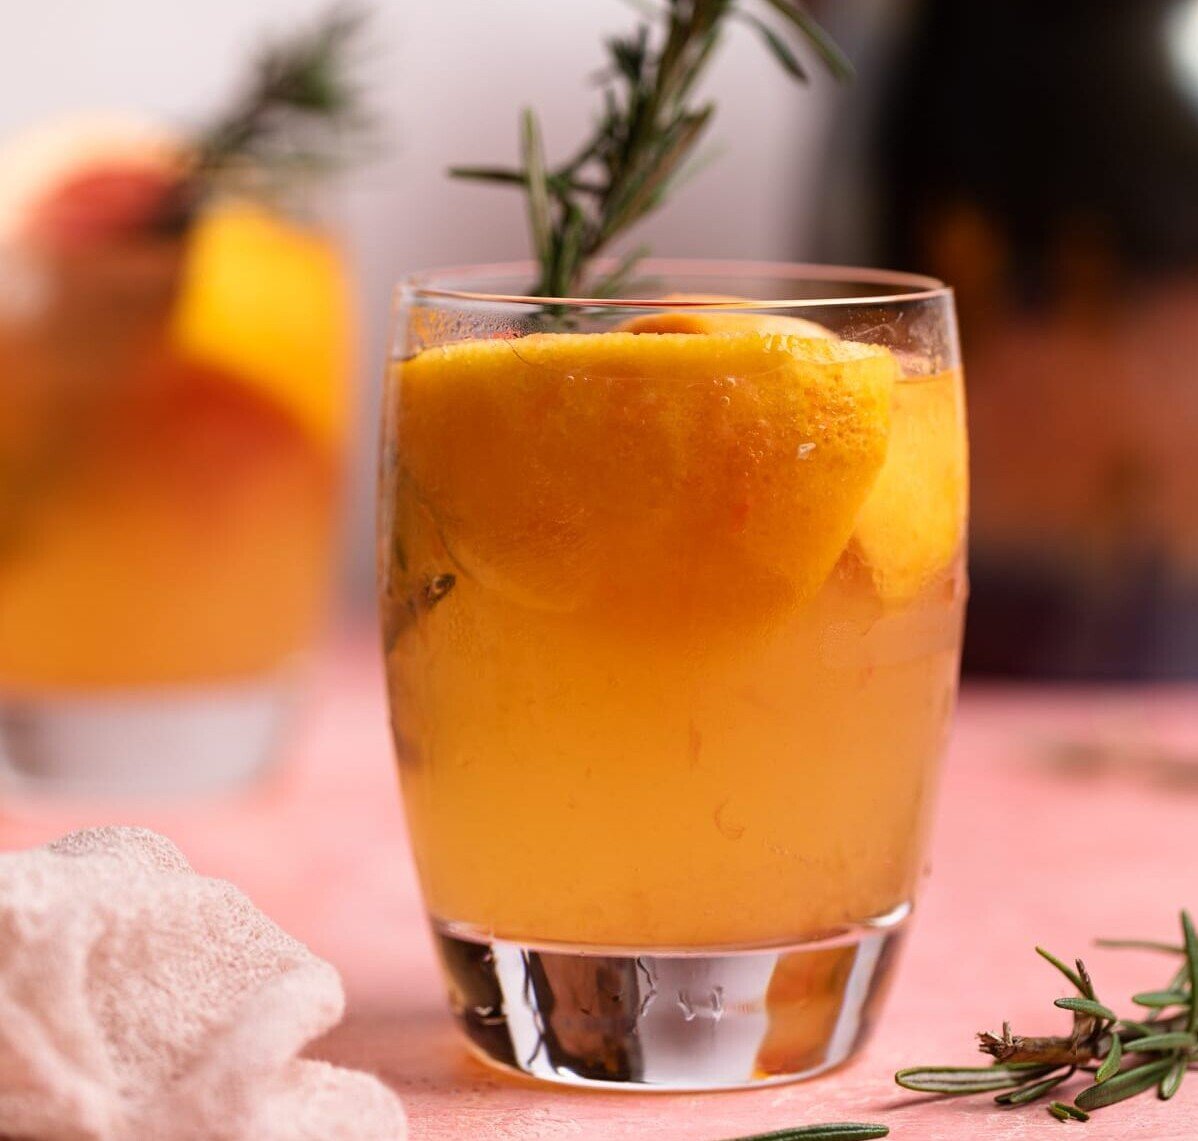 Grapefruit Apple Cider Vinegar drink with fresh rosemary in a glass.